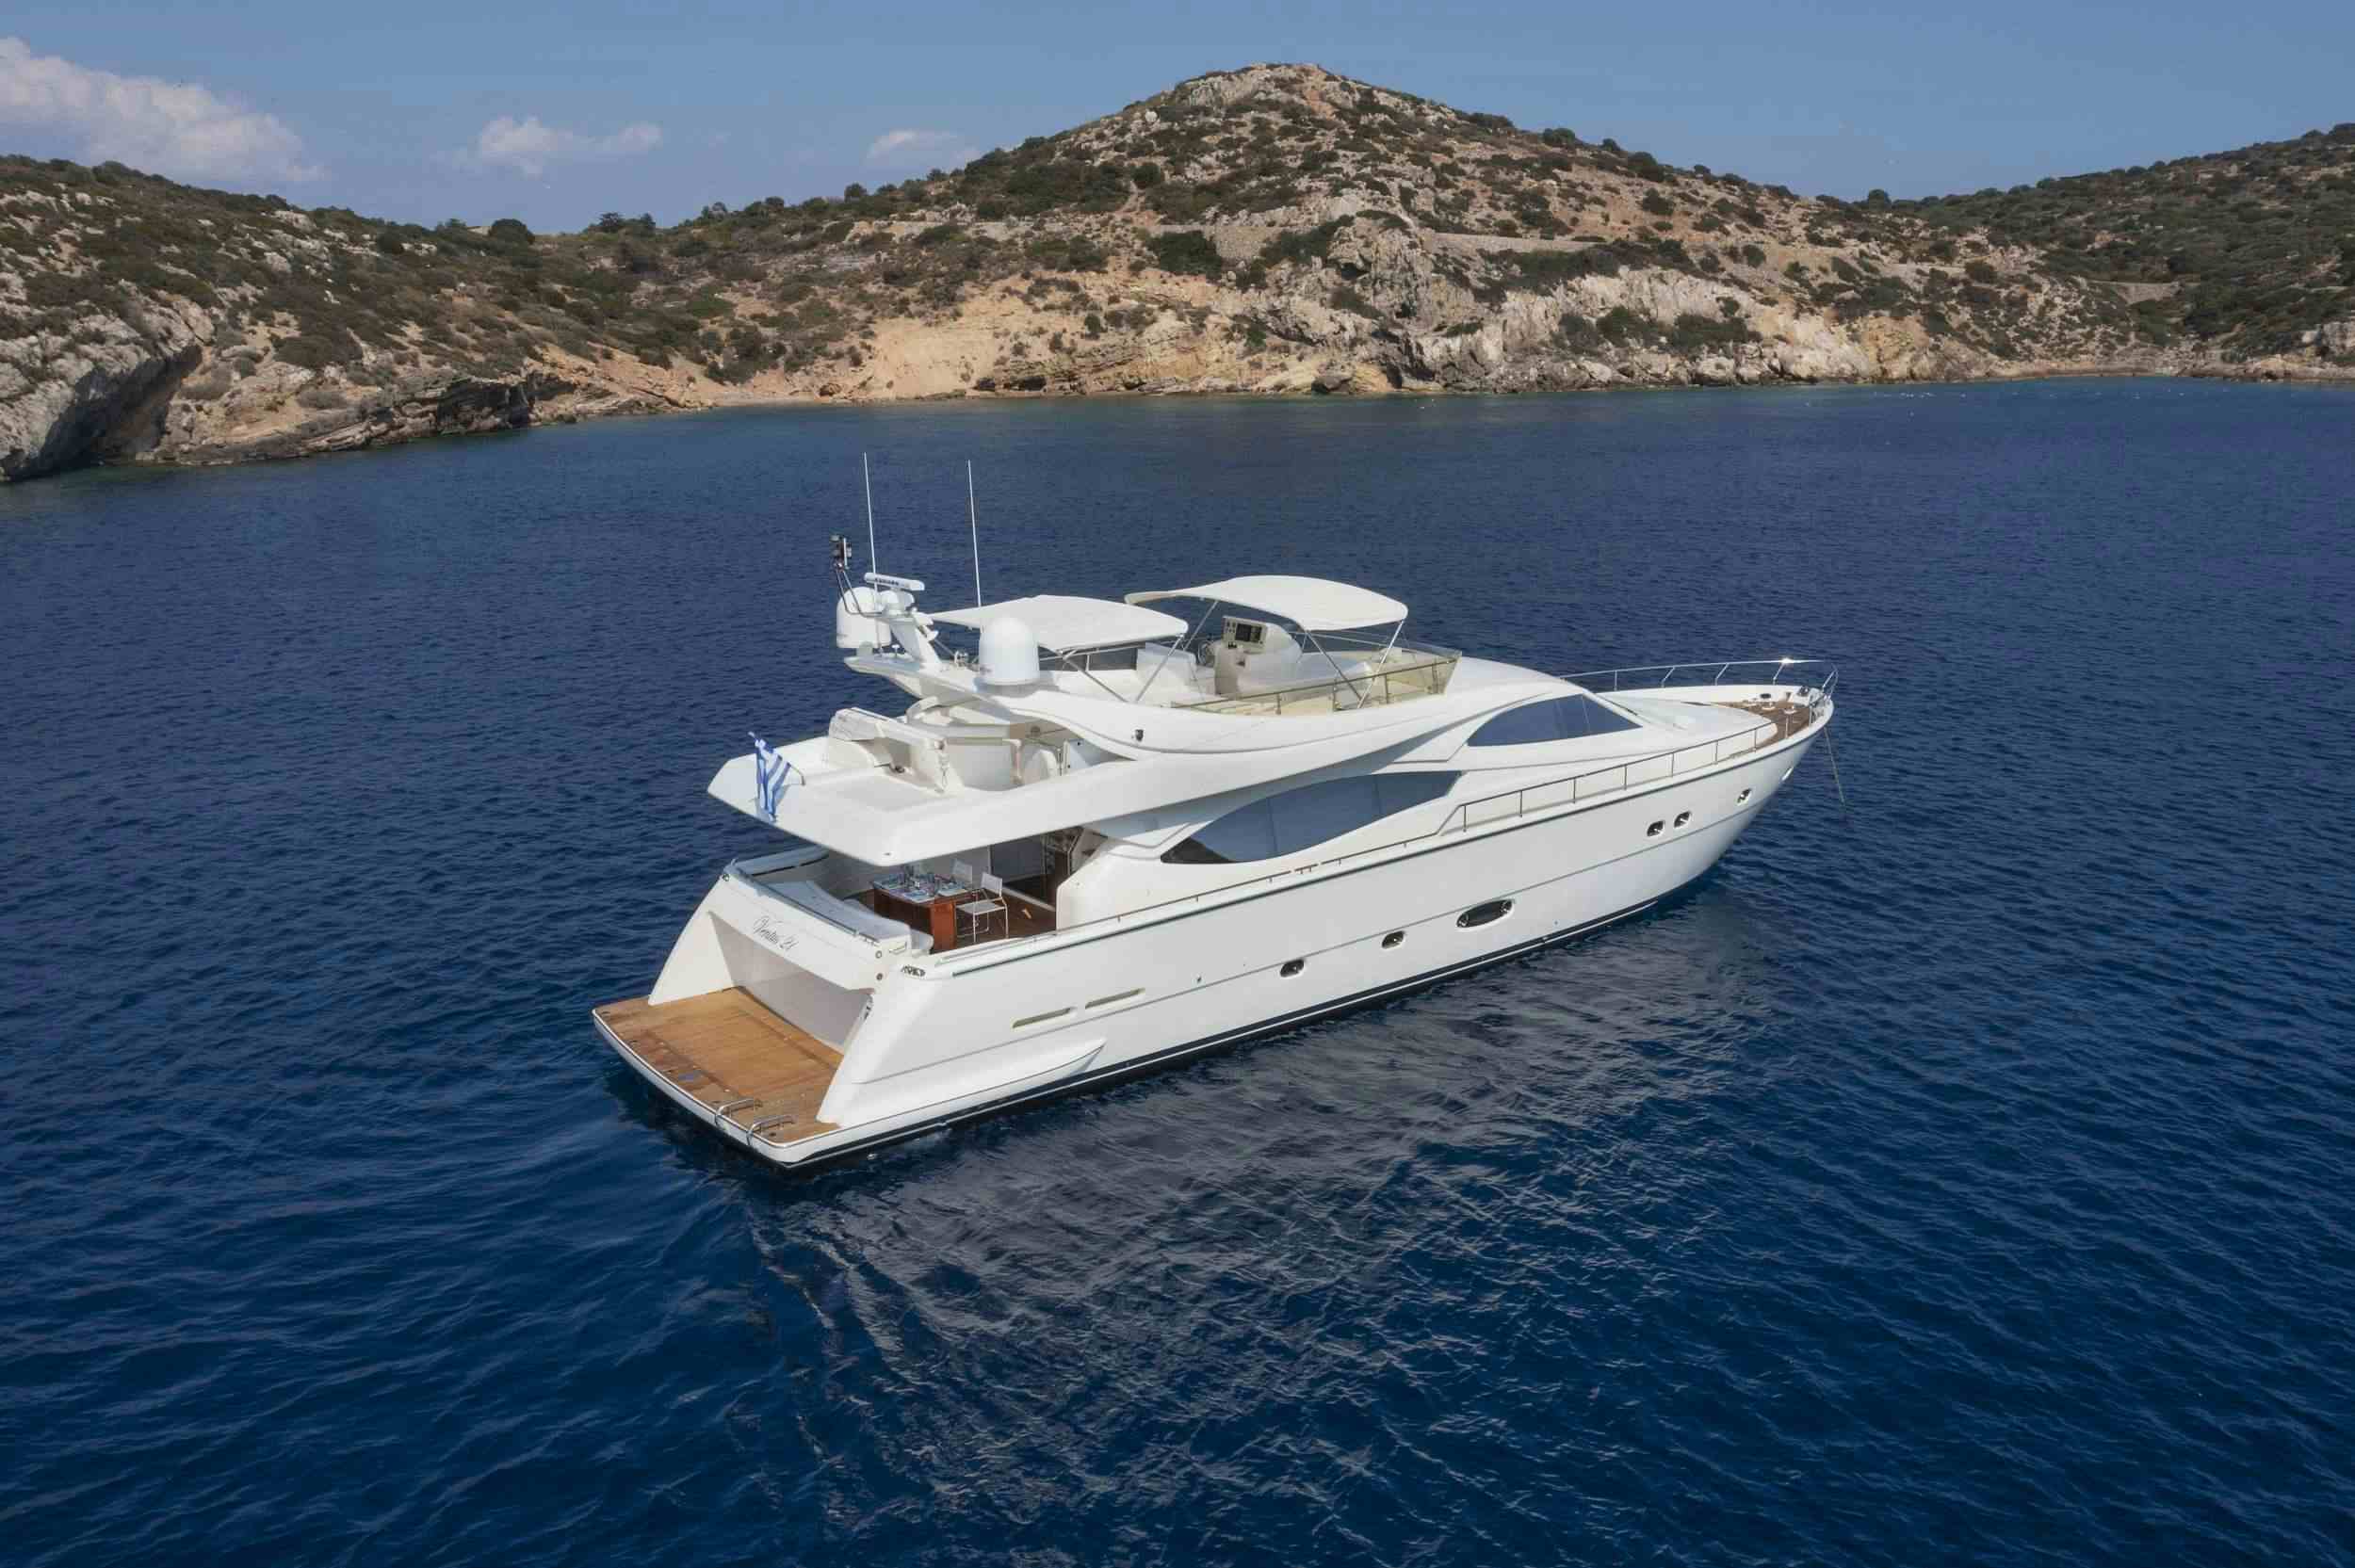 Ventus 21 - Yacht Charter Sithonia & Boat hire in Greece 1